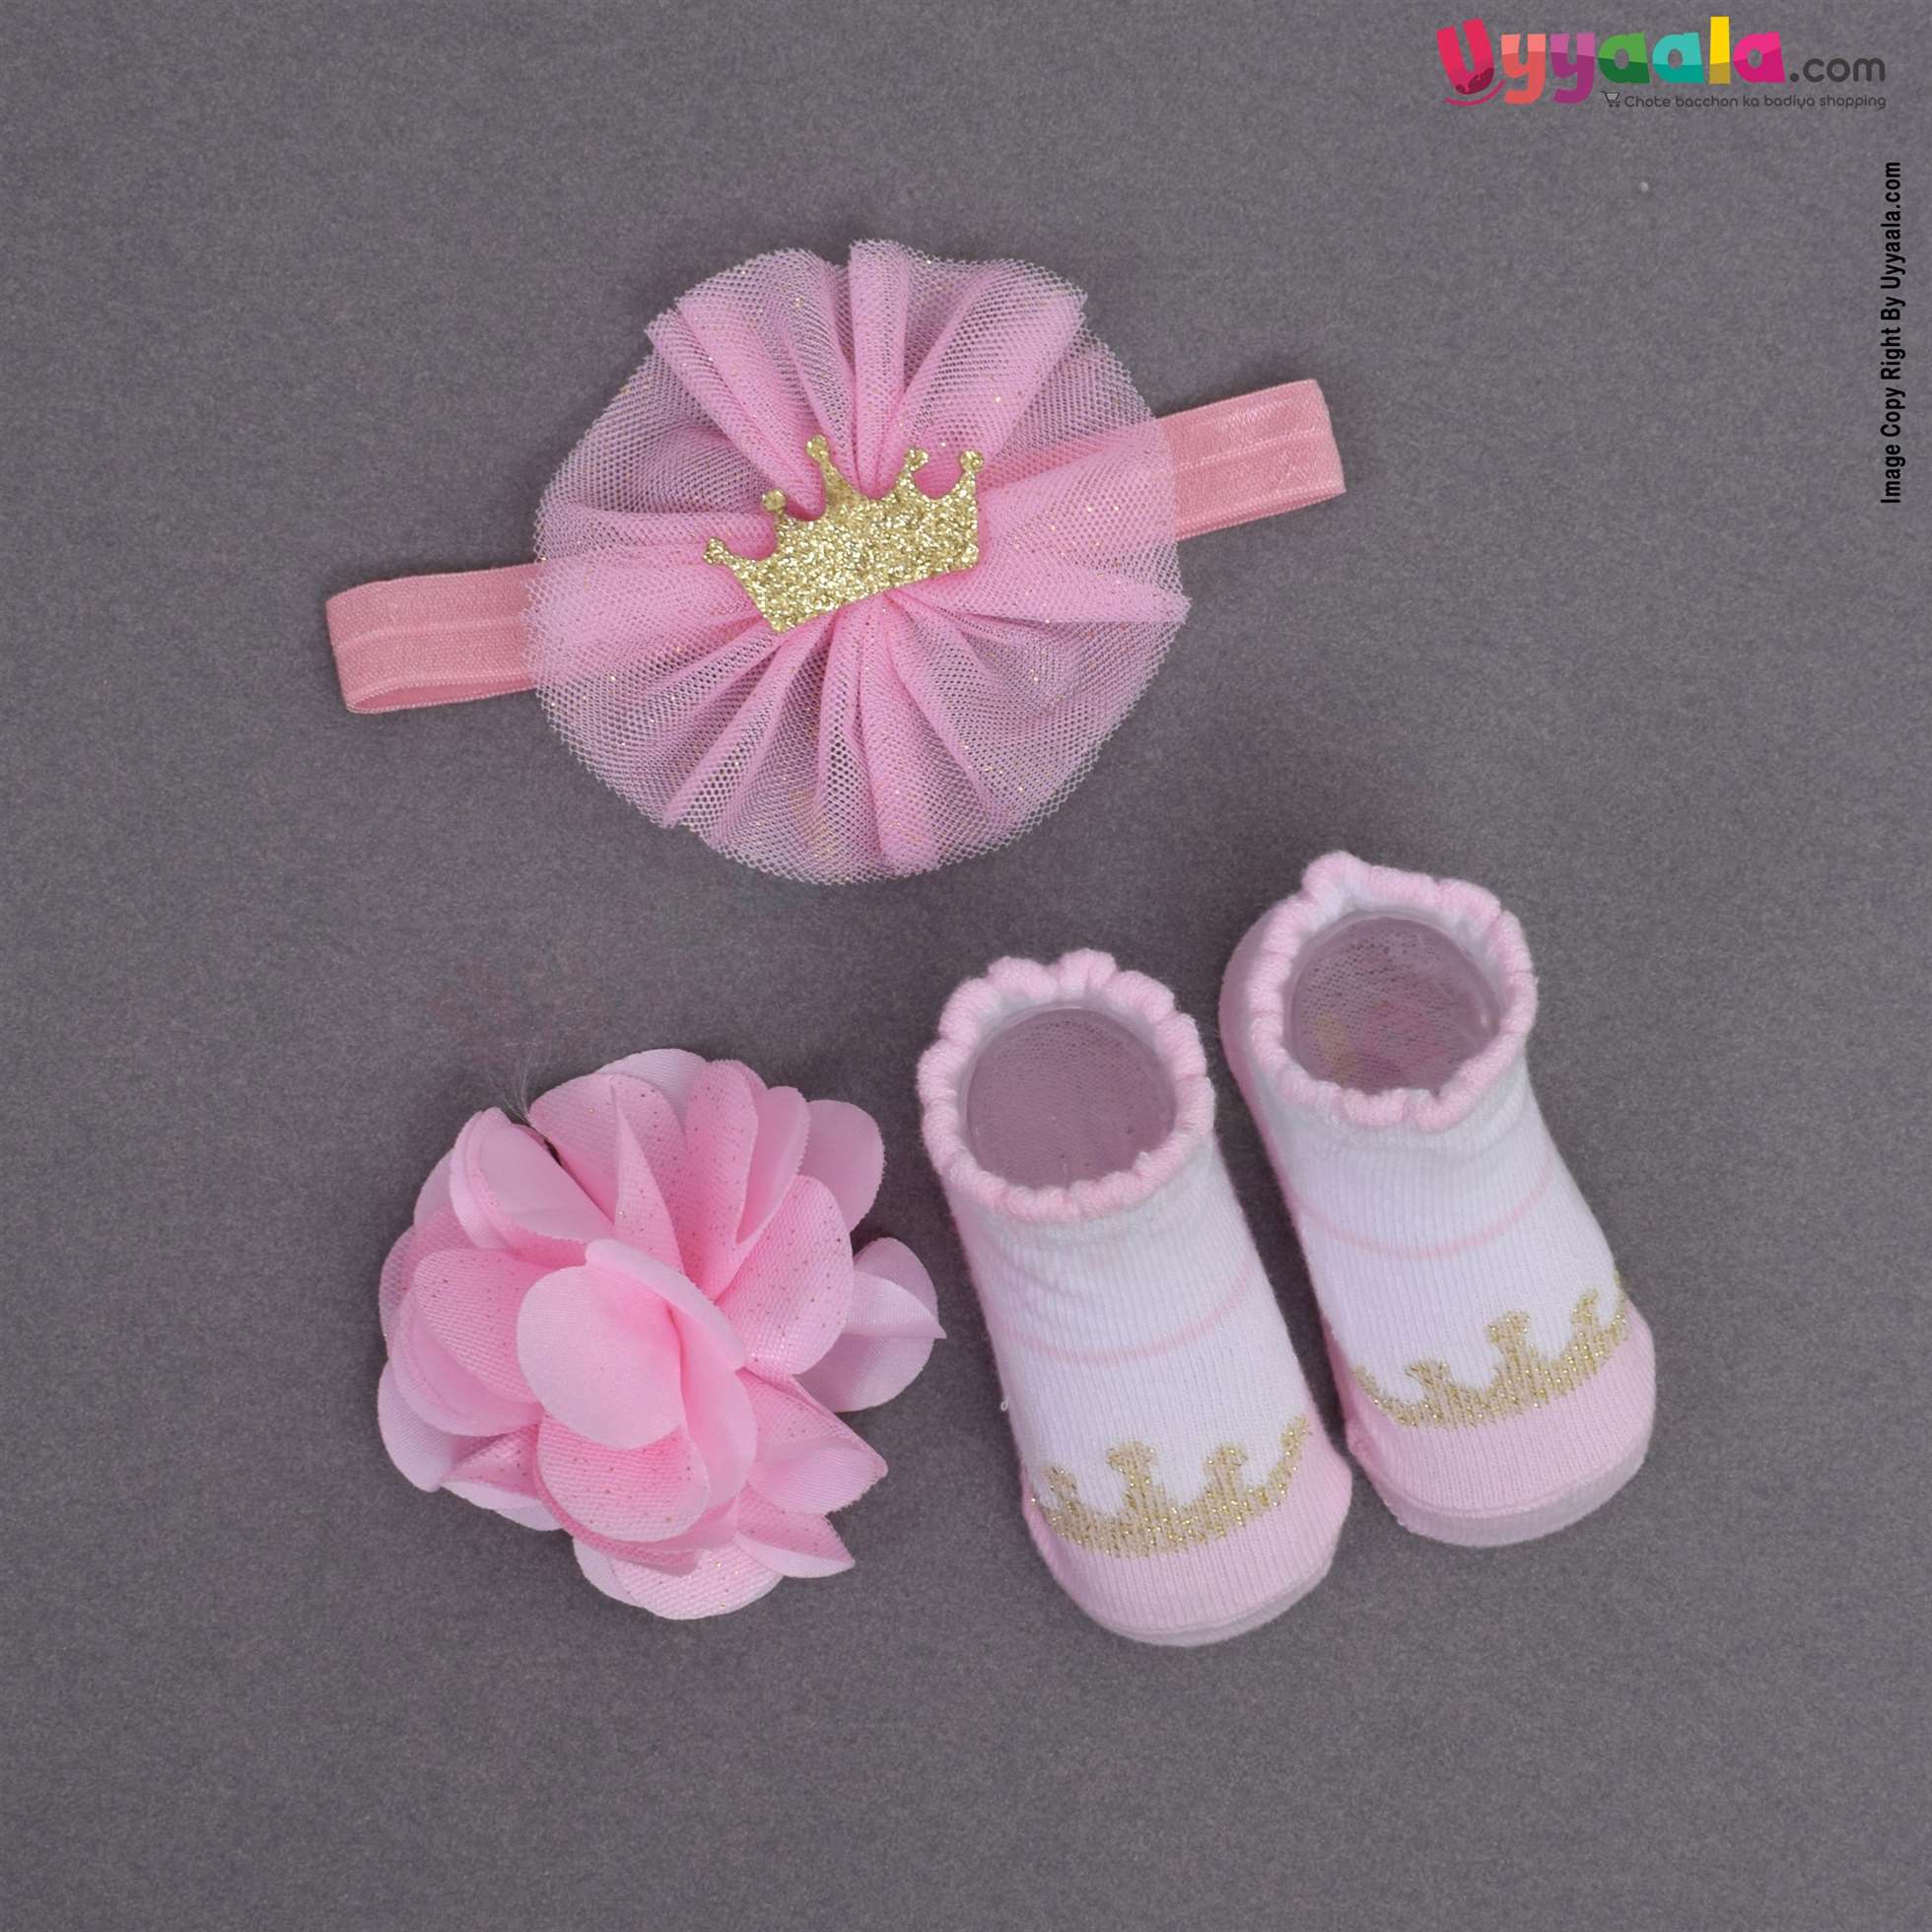 LION BEAR Glittery headwrap, flower bow clip & booties set (3 pcs) for babies - pink with glittery crown patch